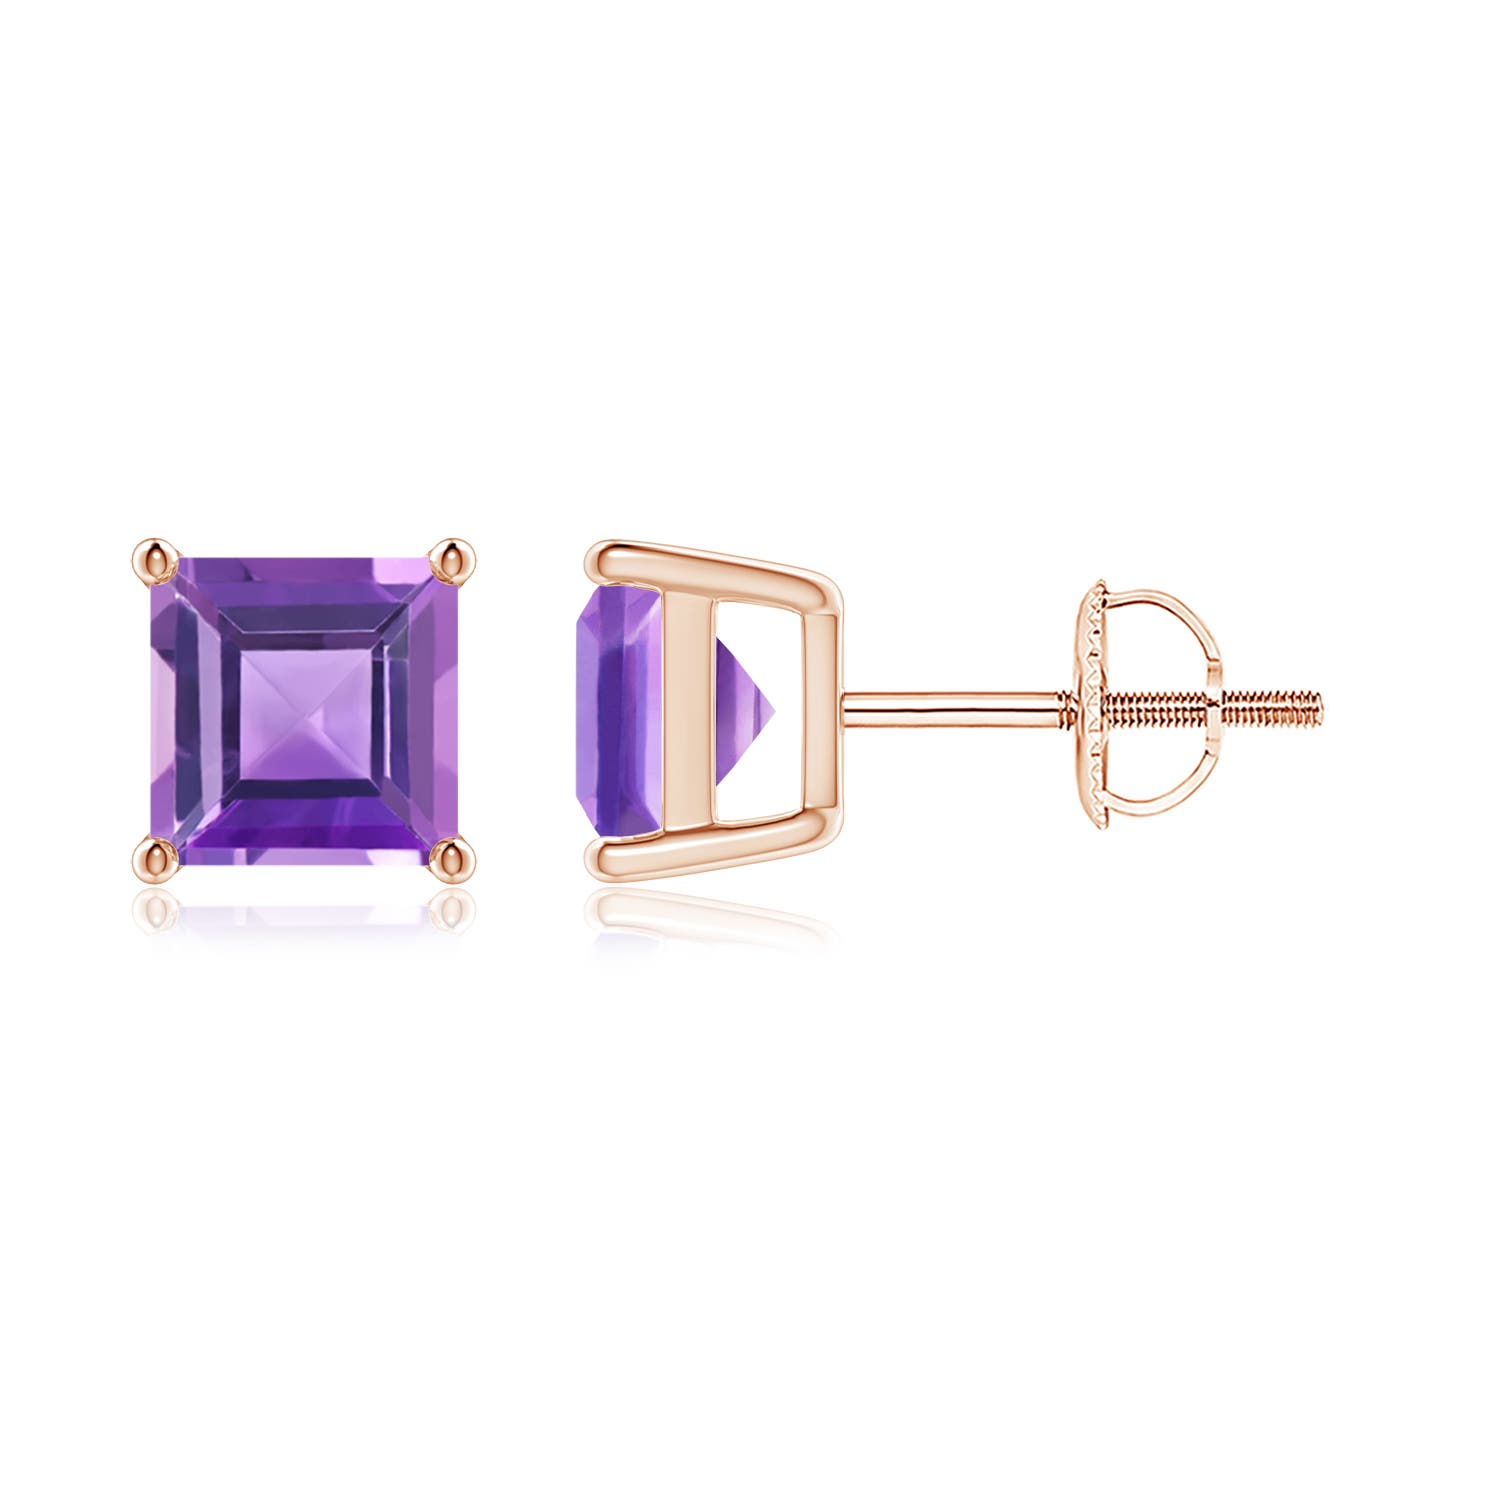 AA - Amethyst / 2 CT / 14 KT Rose Gold